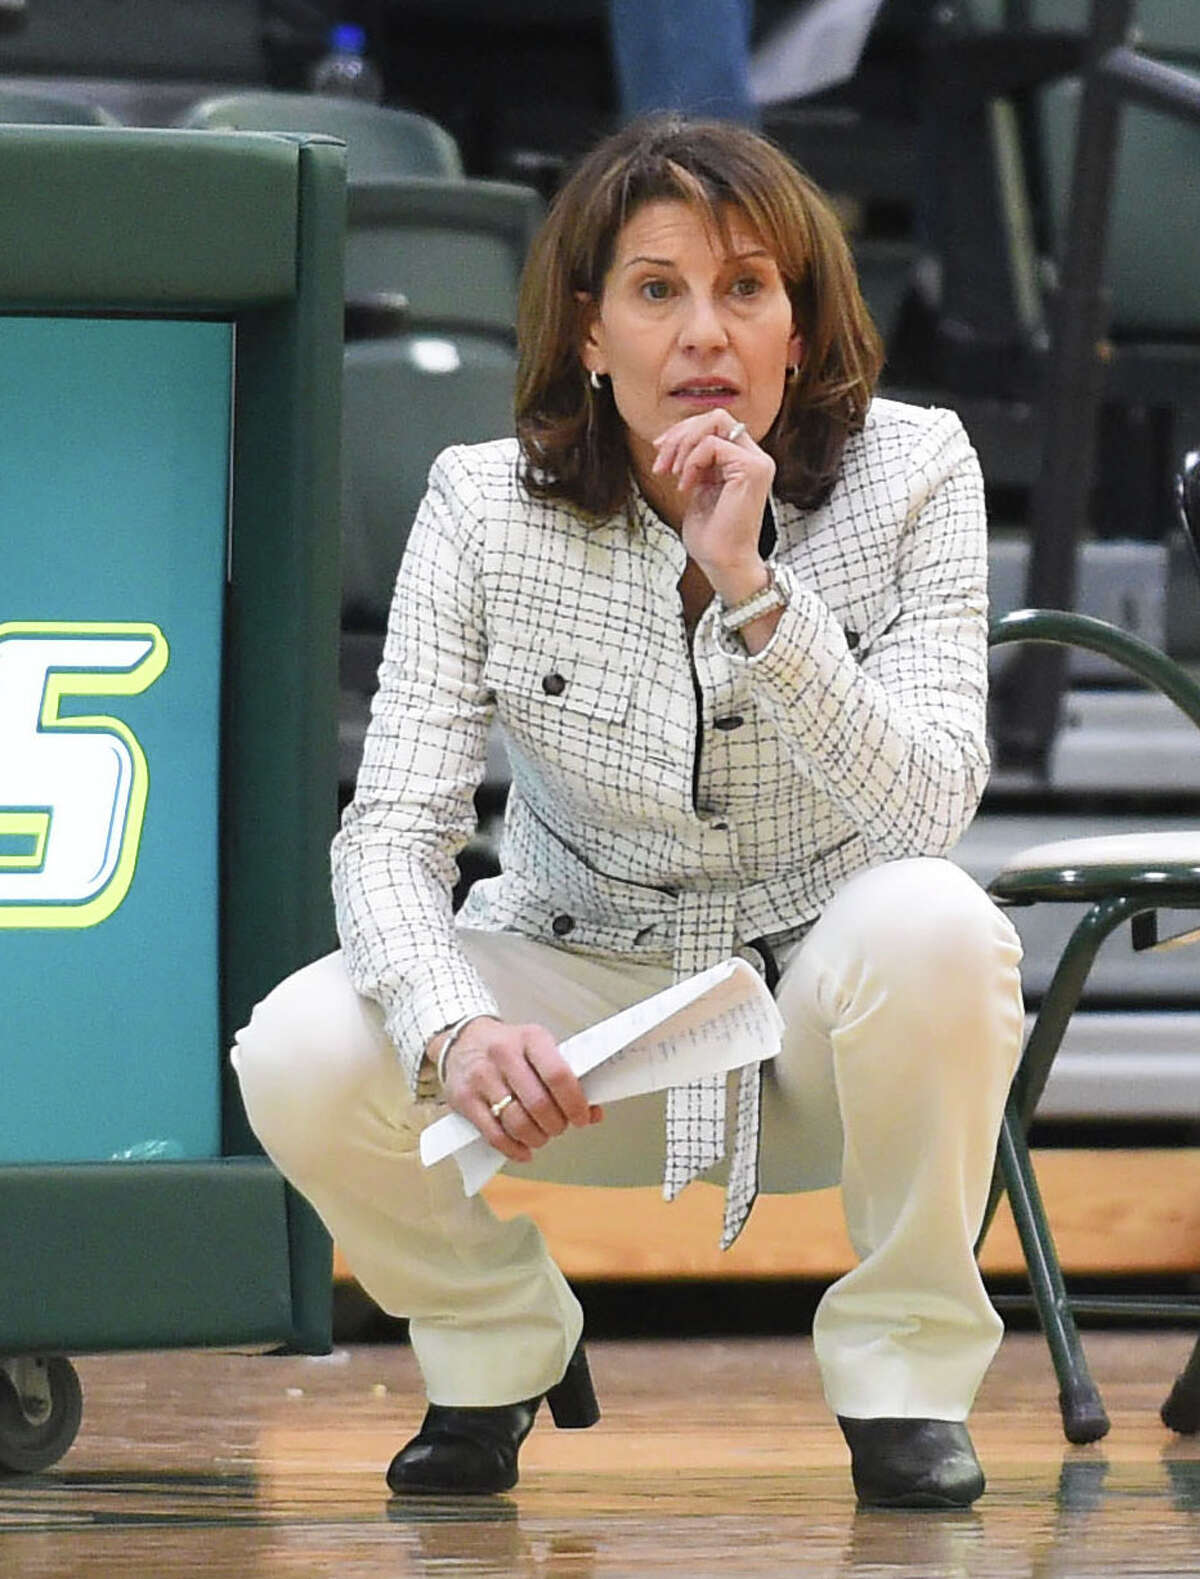 Gina Castelli, the former Siena College head coach who is now in her 6th season at Le Moyne, has relied on a trio of Capital Region players in this, her best season, at the Division II level. Her team won the Northeast-10 Conference Championship Sunday and will play in the NCAA Championship starting Friday. (Le Moyne Athletics / Greg Wall)